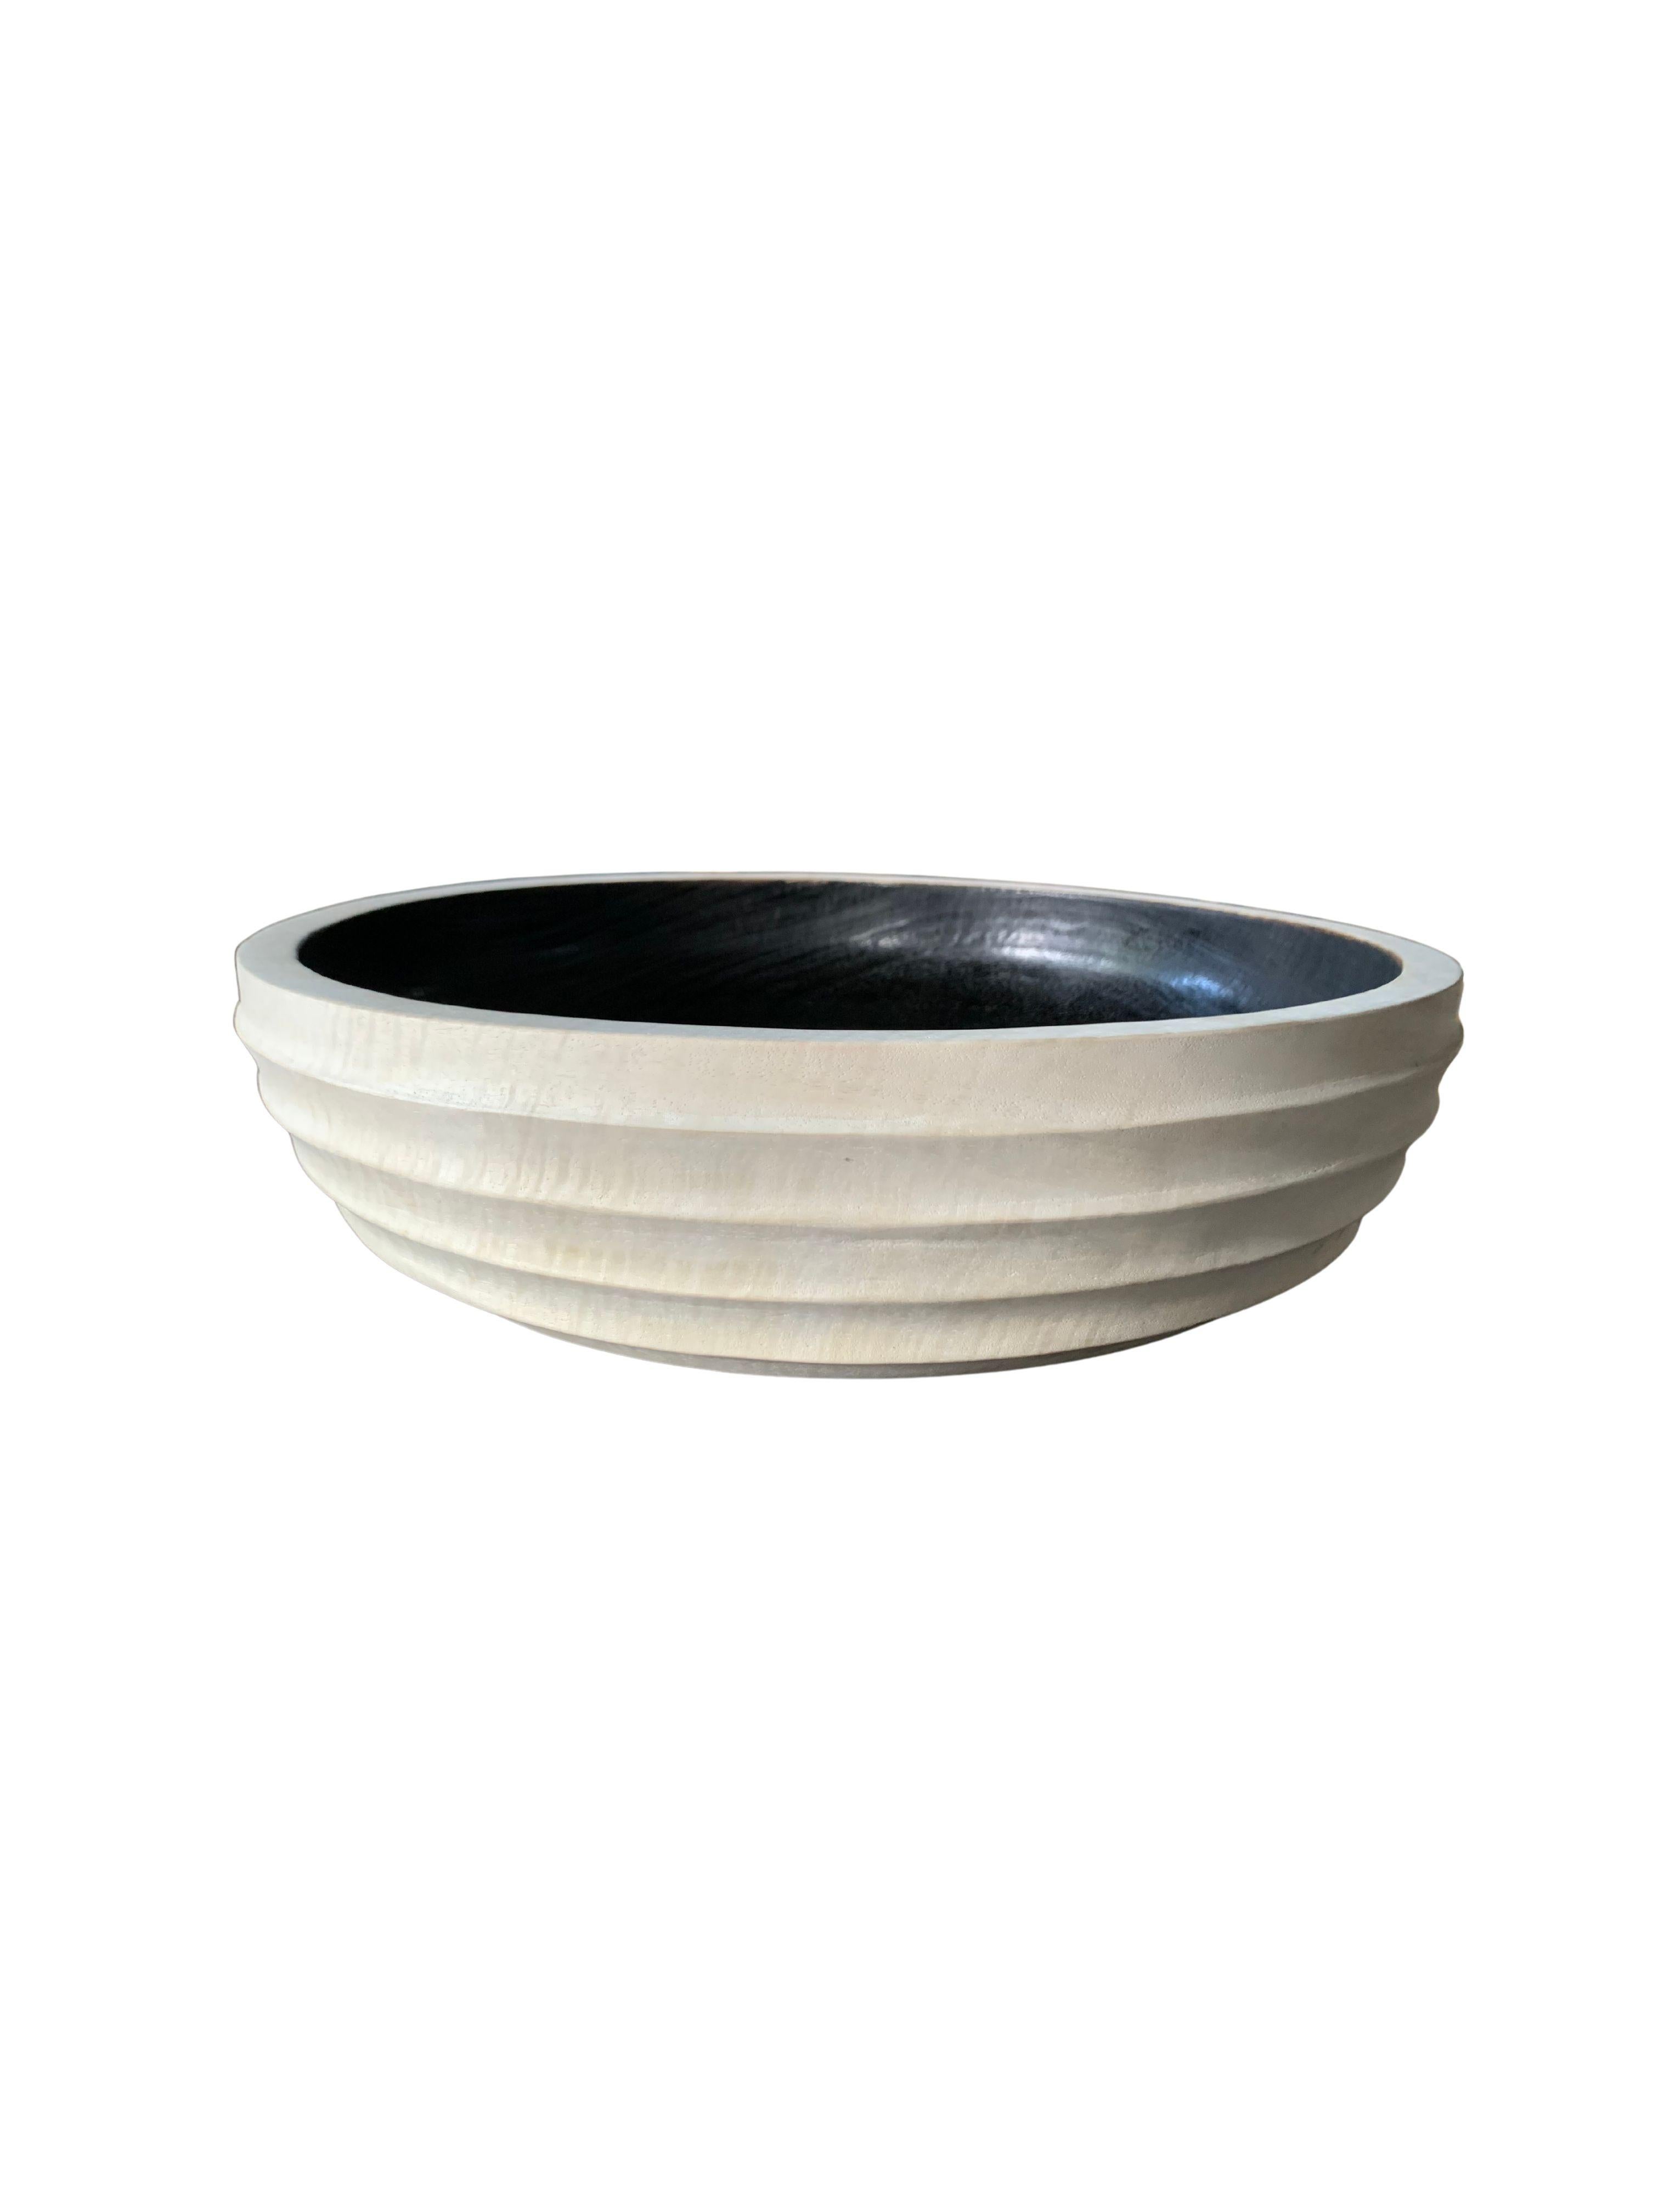 A hand-crafted mango wood bowl. The bowl was cut from a much larger slab of mango wood and features a ribbed texture on its sides. Unique to this bowl are the mix of bleached and burnt finishes. The outter exterior of the bowl features a bleached